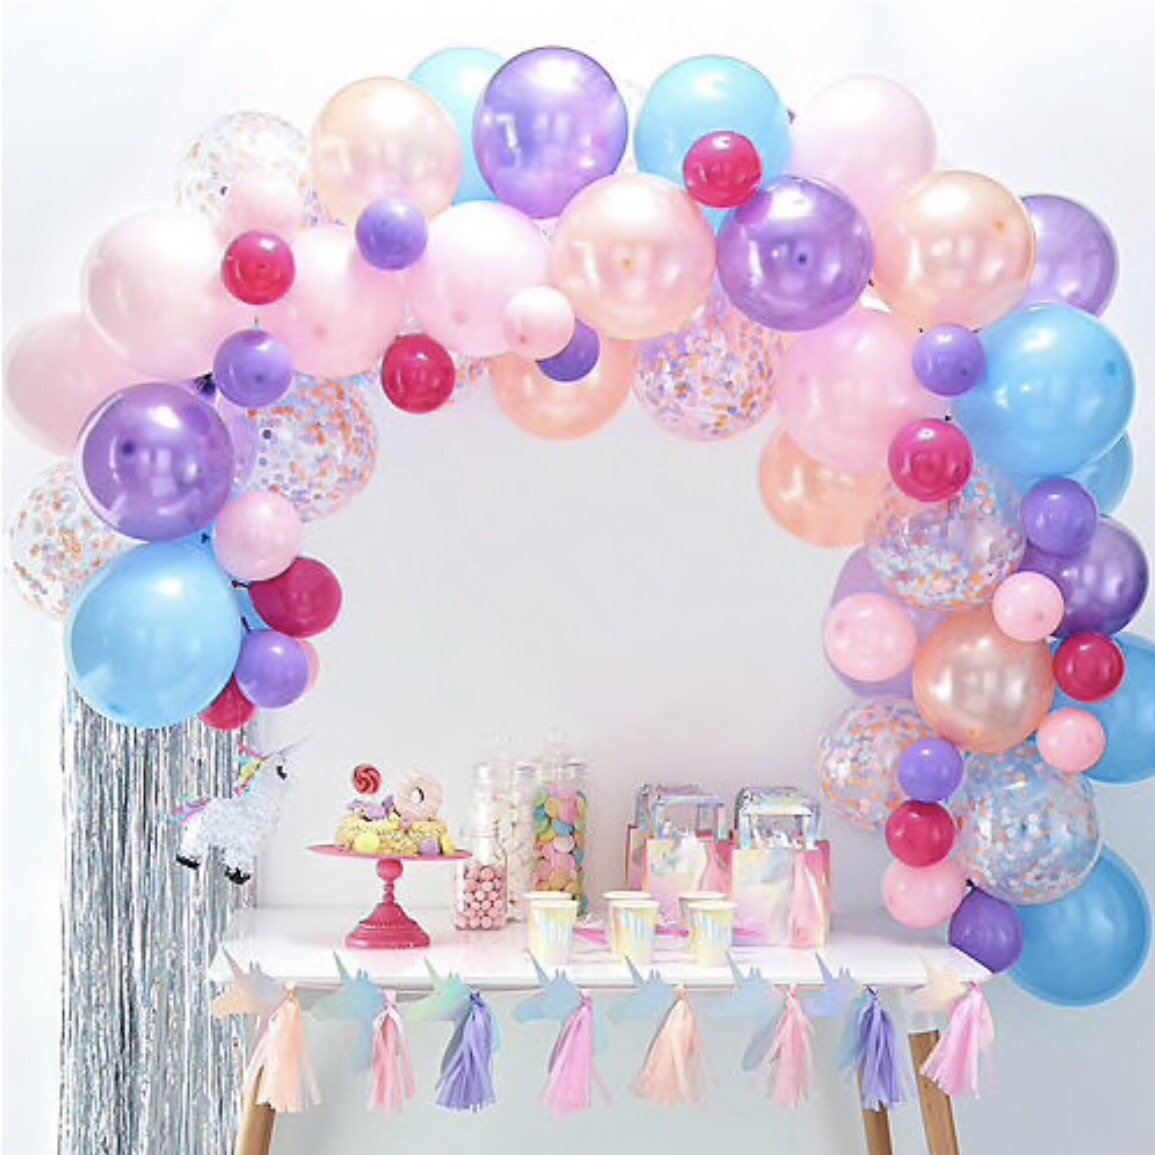 BALLOON ARCH - PASTEL GINGER RAY, Balloons, GINGER RAY - Bon + Co. Party Studio